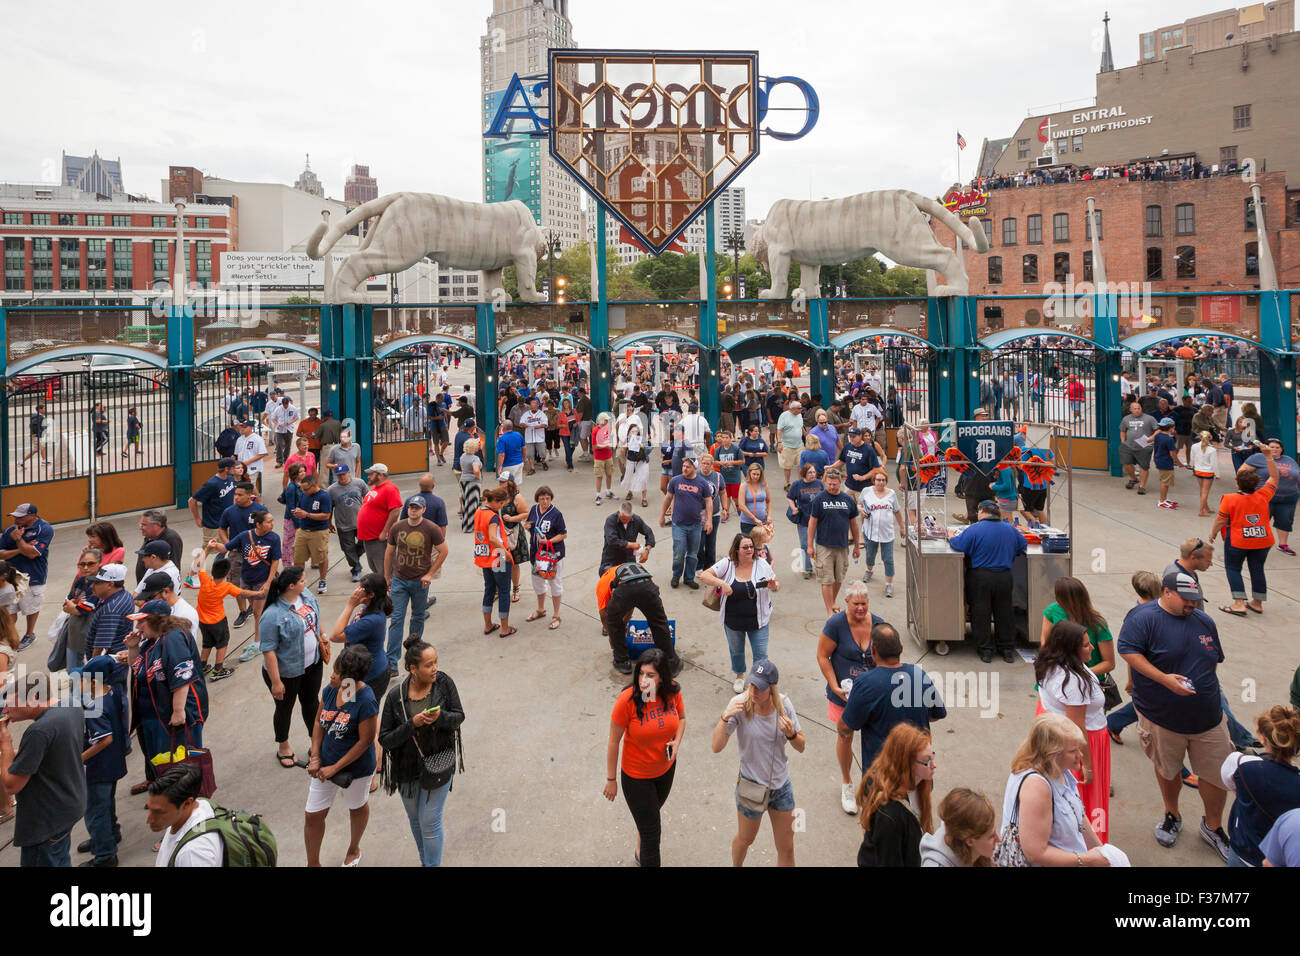 Detroit, Michigan - Baseball fans arrive for a game at Comerica Park, home of the Detroit Tigers major league baseball team. Stock Photo